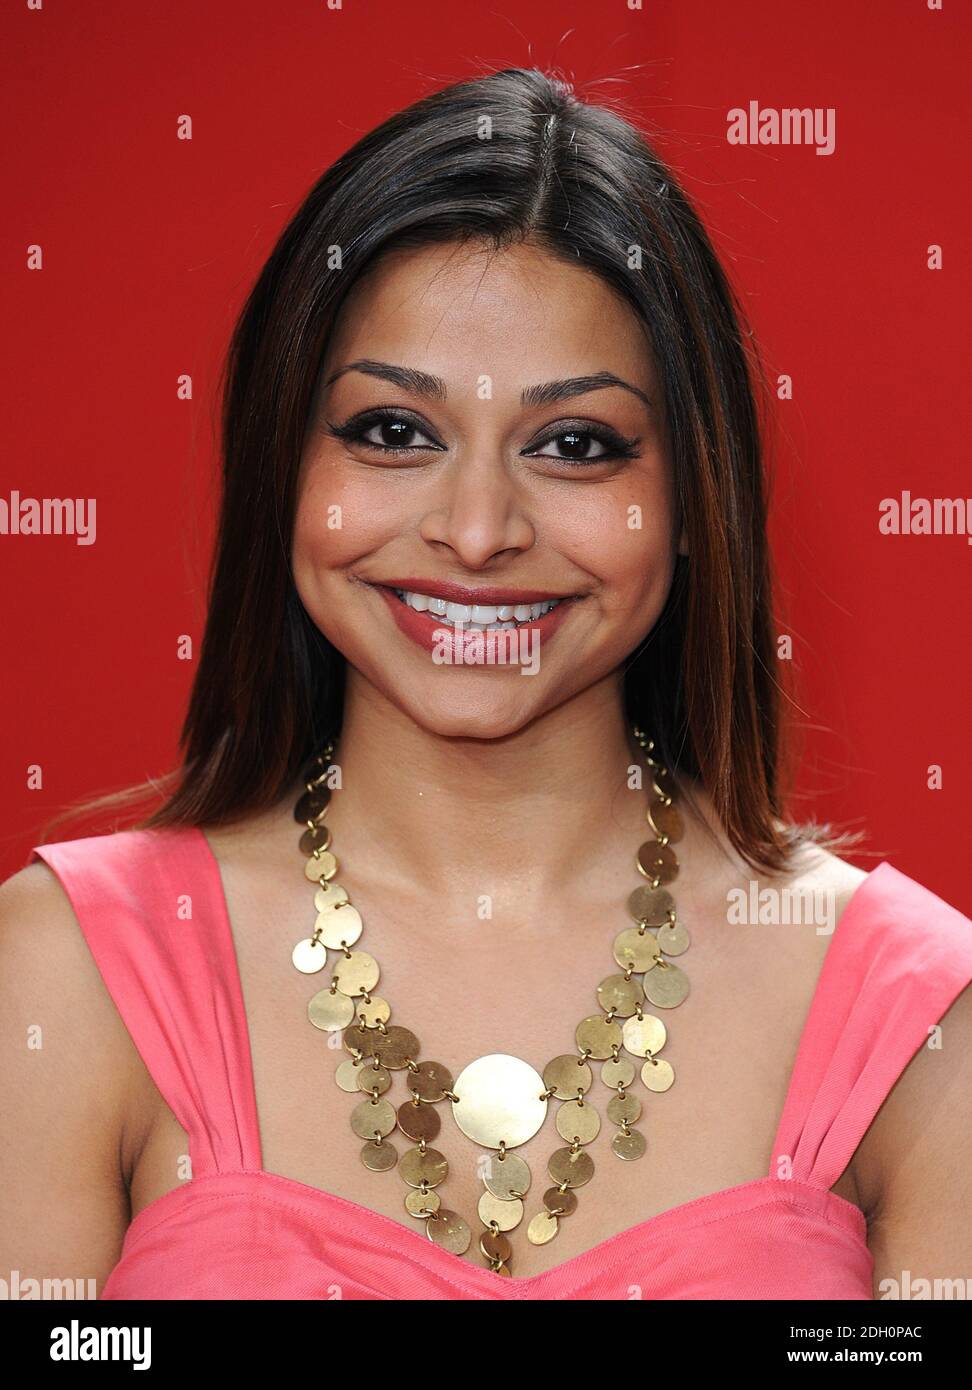 Ayesha Dharker arriving for the 2009 British Soap Awards at the BBC Television Centre, Wood Lane, London. Stock Photo